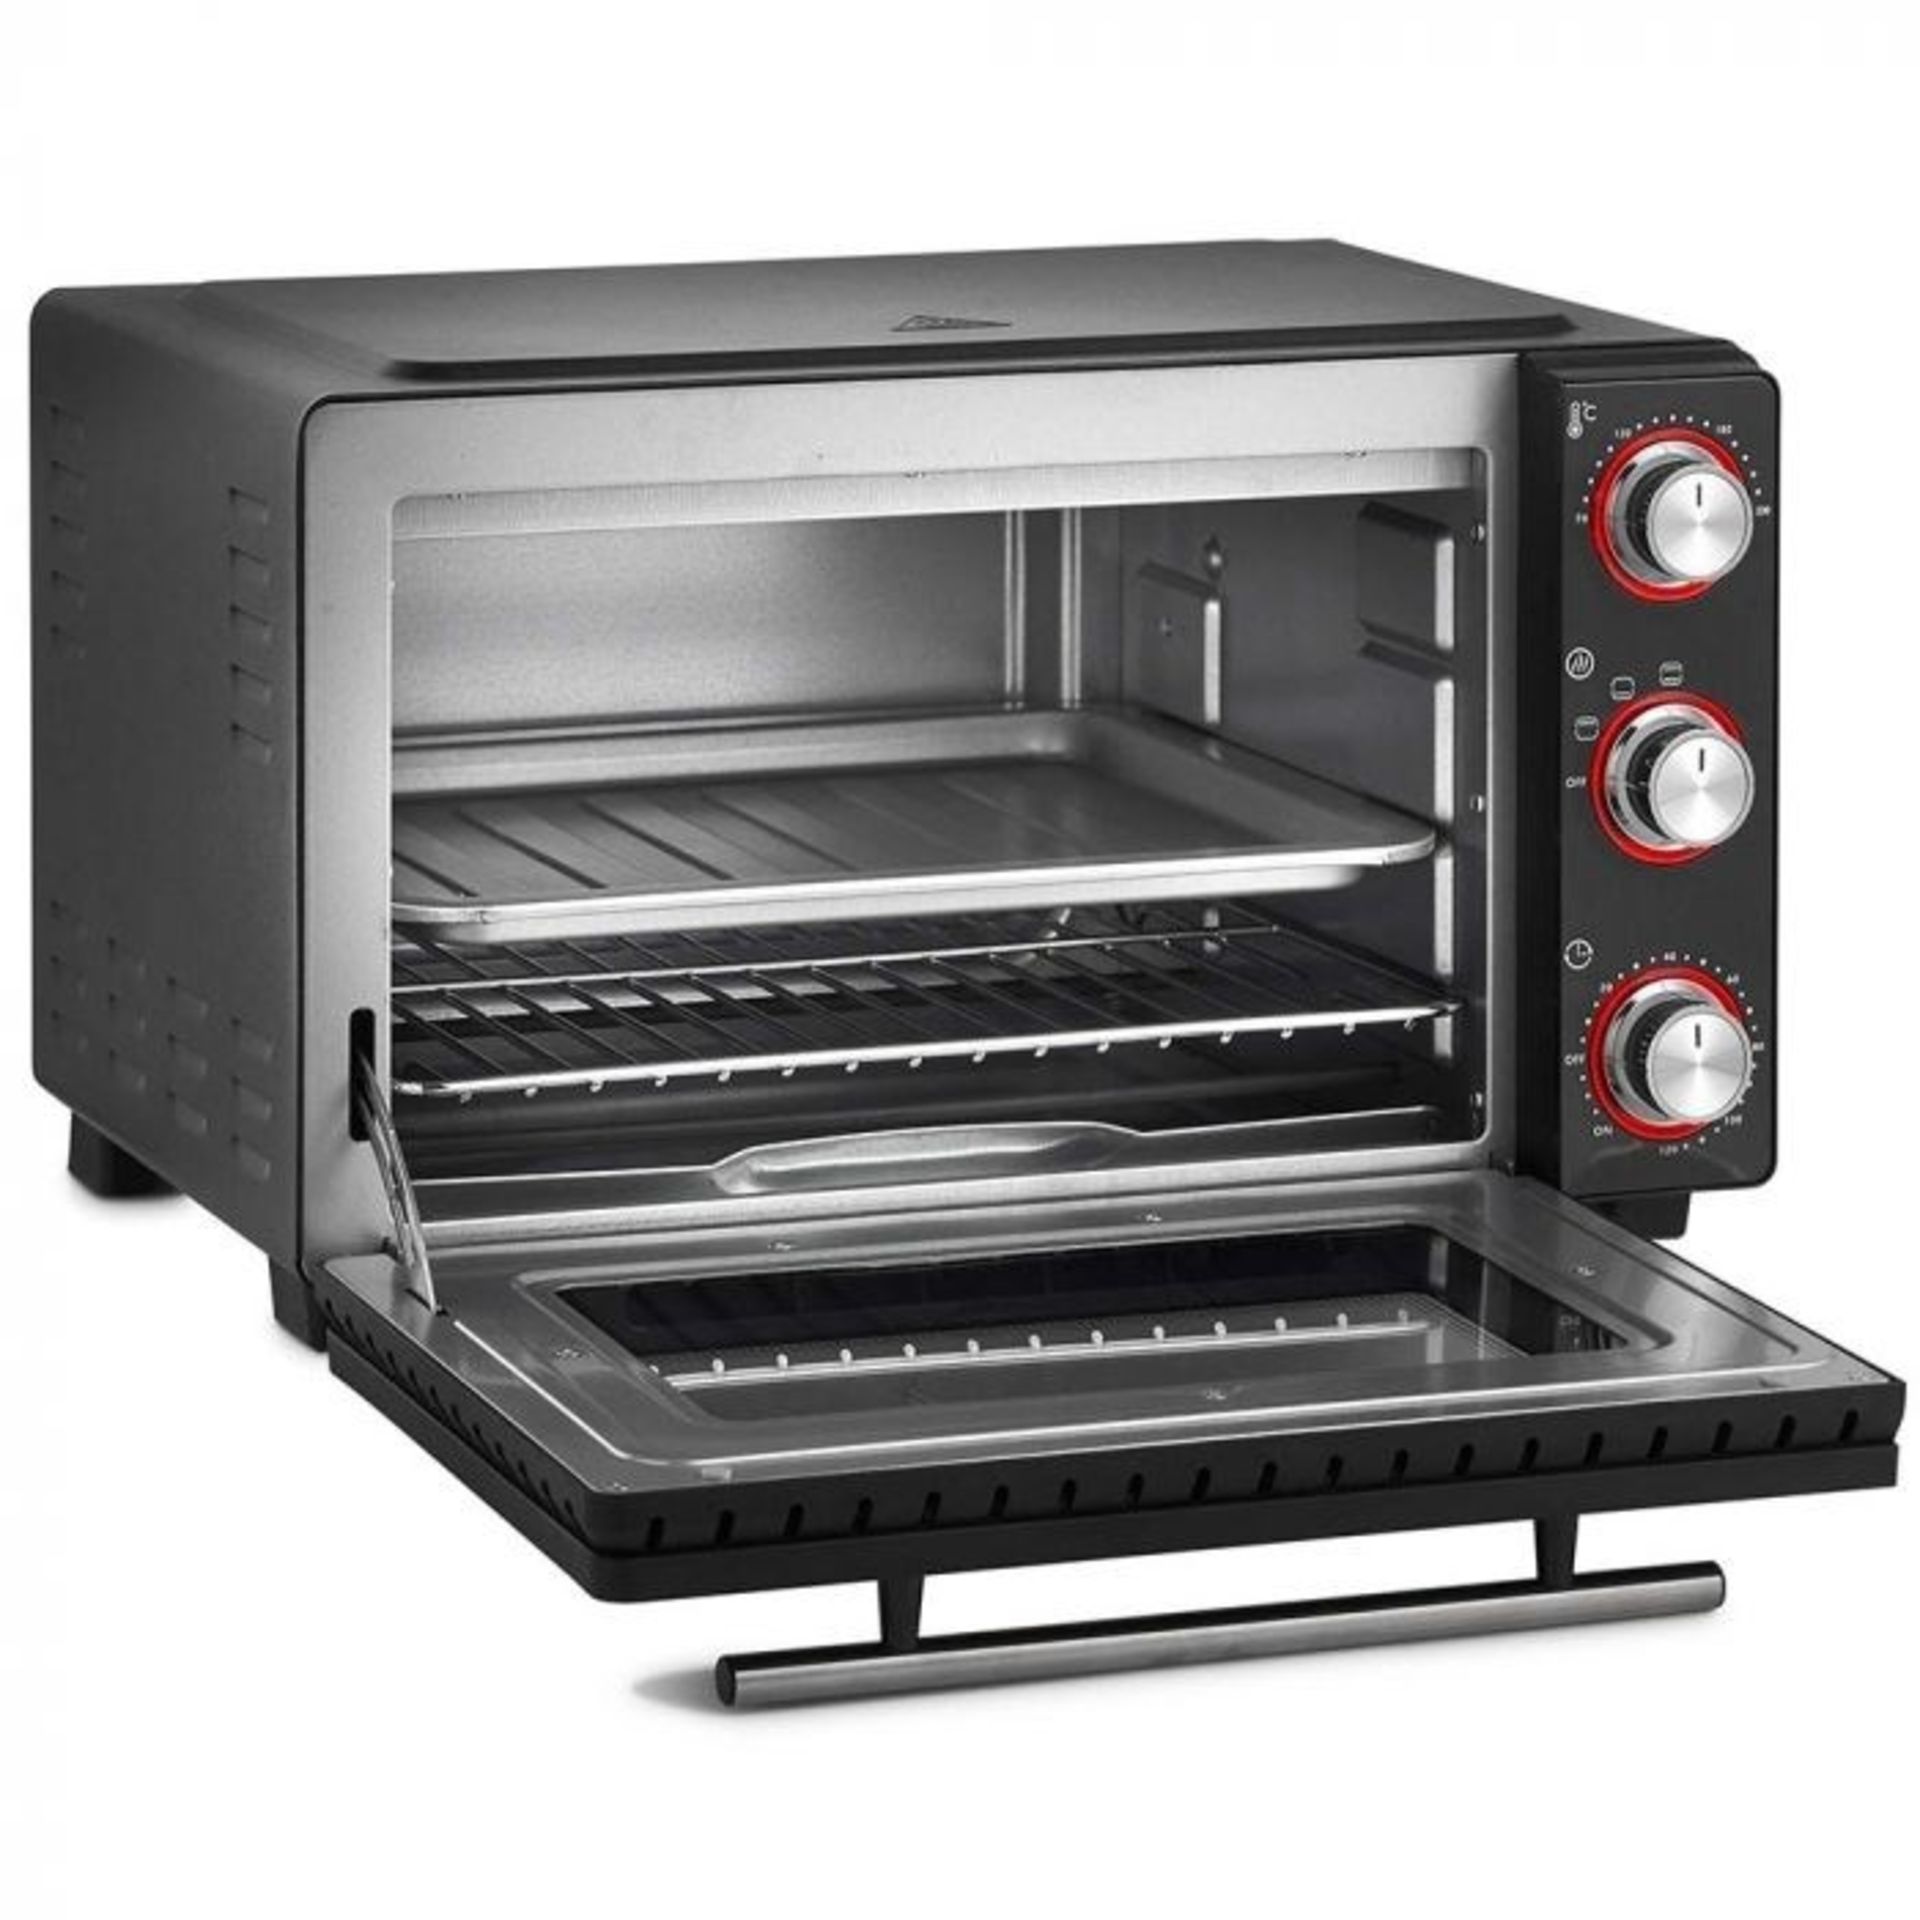 (S34) 28L Mini Oven Cooker & Grill 28L capacity and unobtrusive size makes it ideal for spaces... - Image 2 of 4